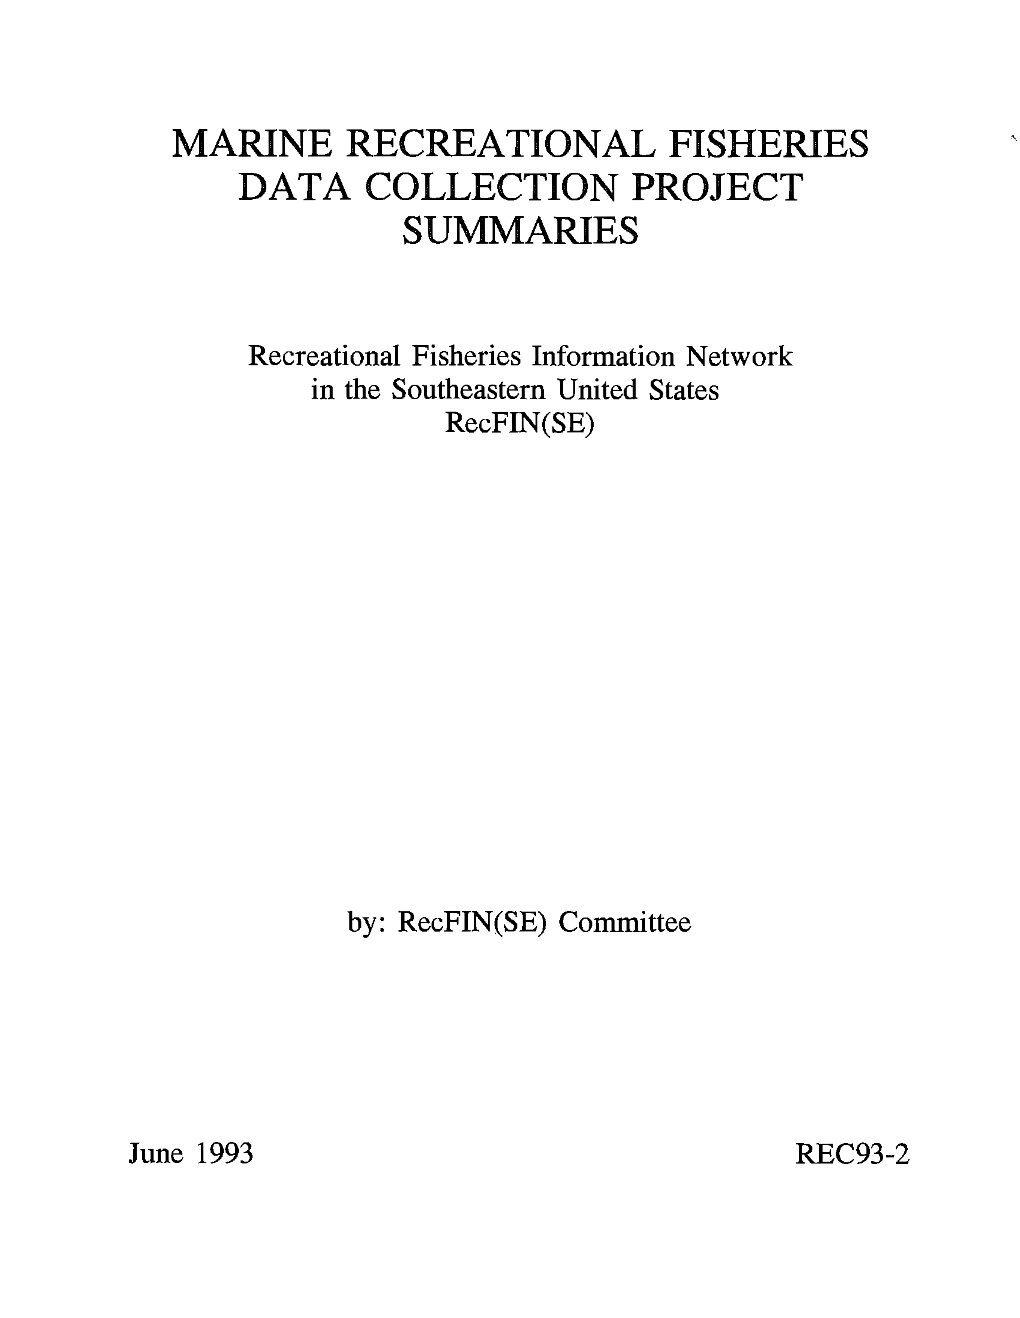 Marine Recreational Fisheries Data Collection Project Summaries 1993